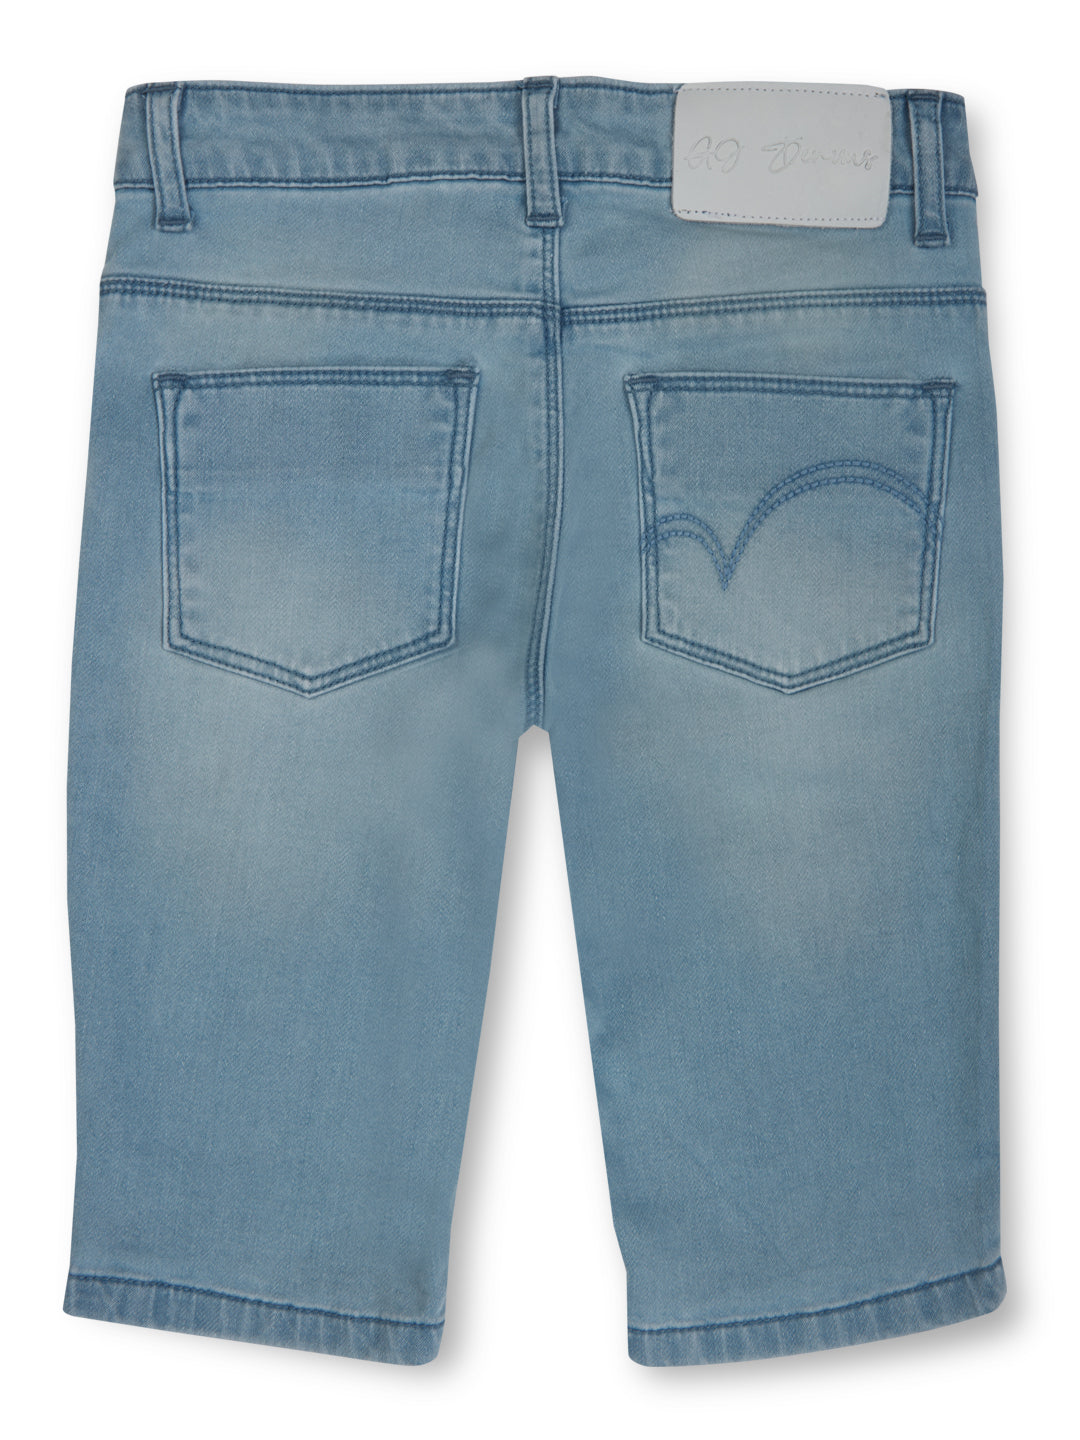 Girls woven blue denim pedalpusher pants with emroidery